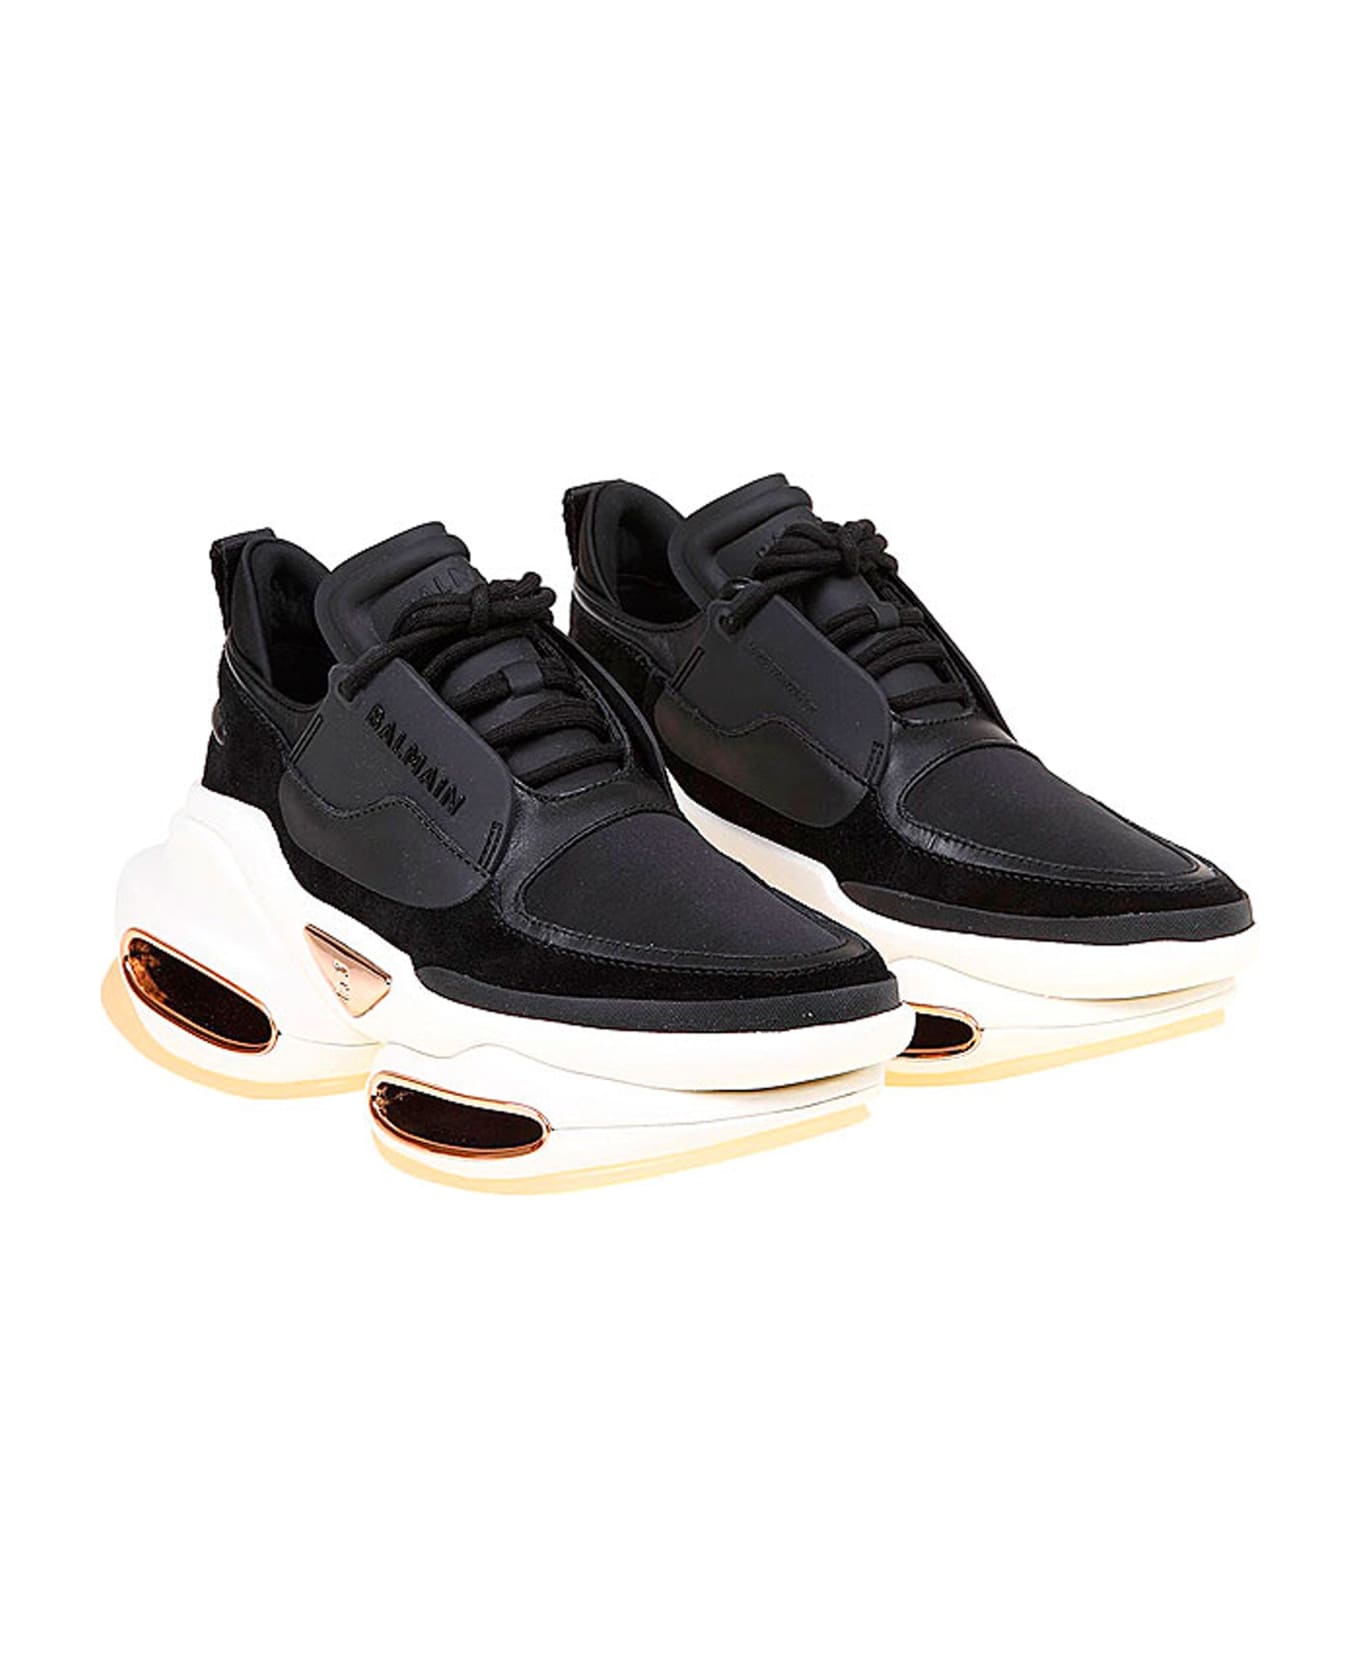 Balmain Leather And Fabric Sneakers - Black スニーカー